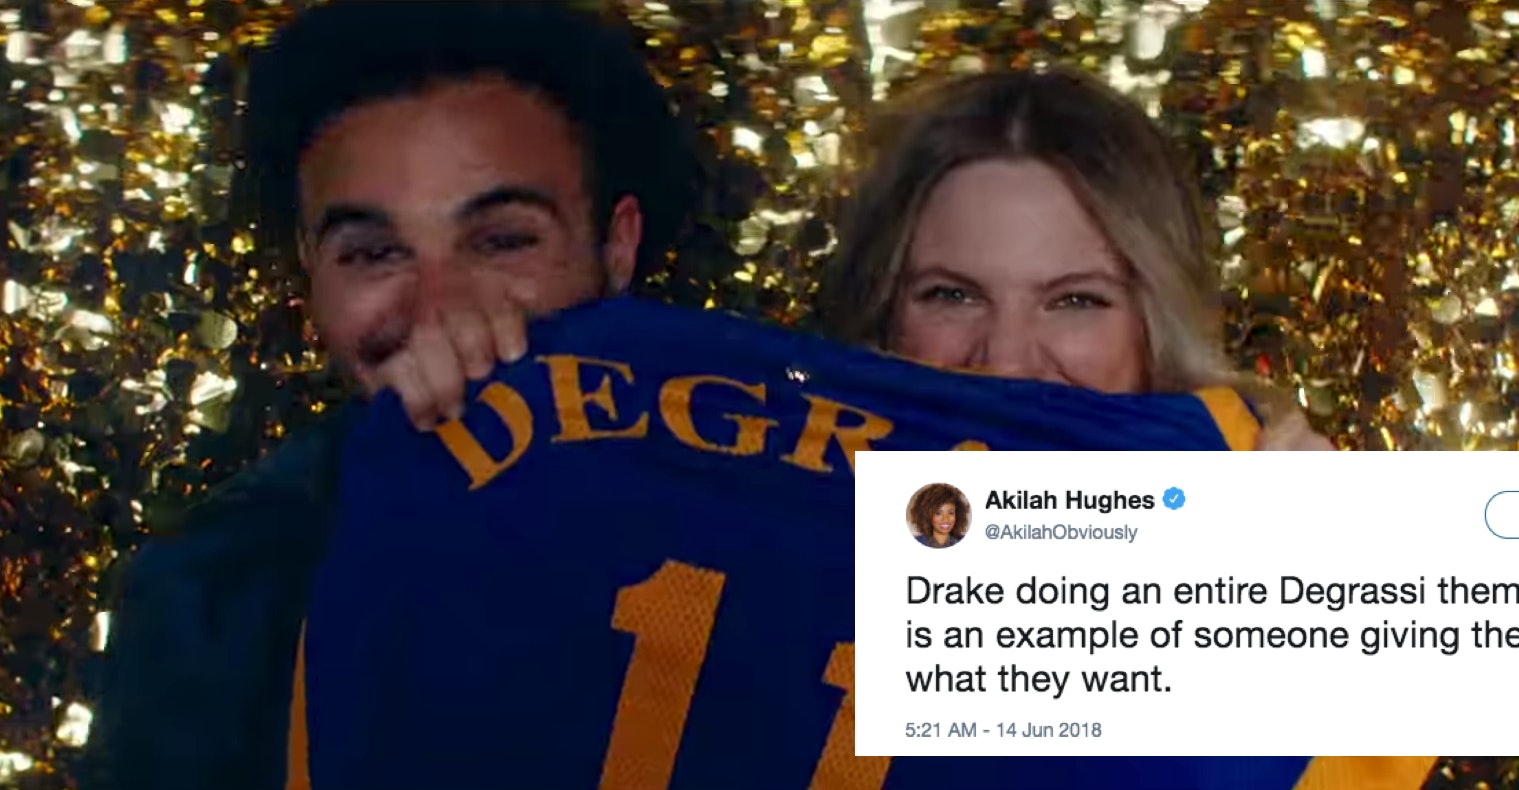 Memes Tweets About Drakes Degrassi Video That True Fans Will